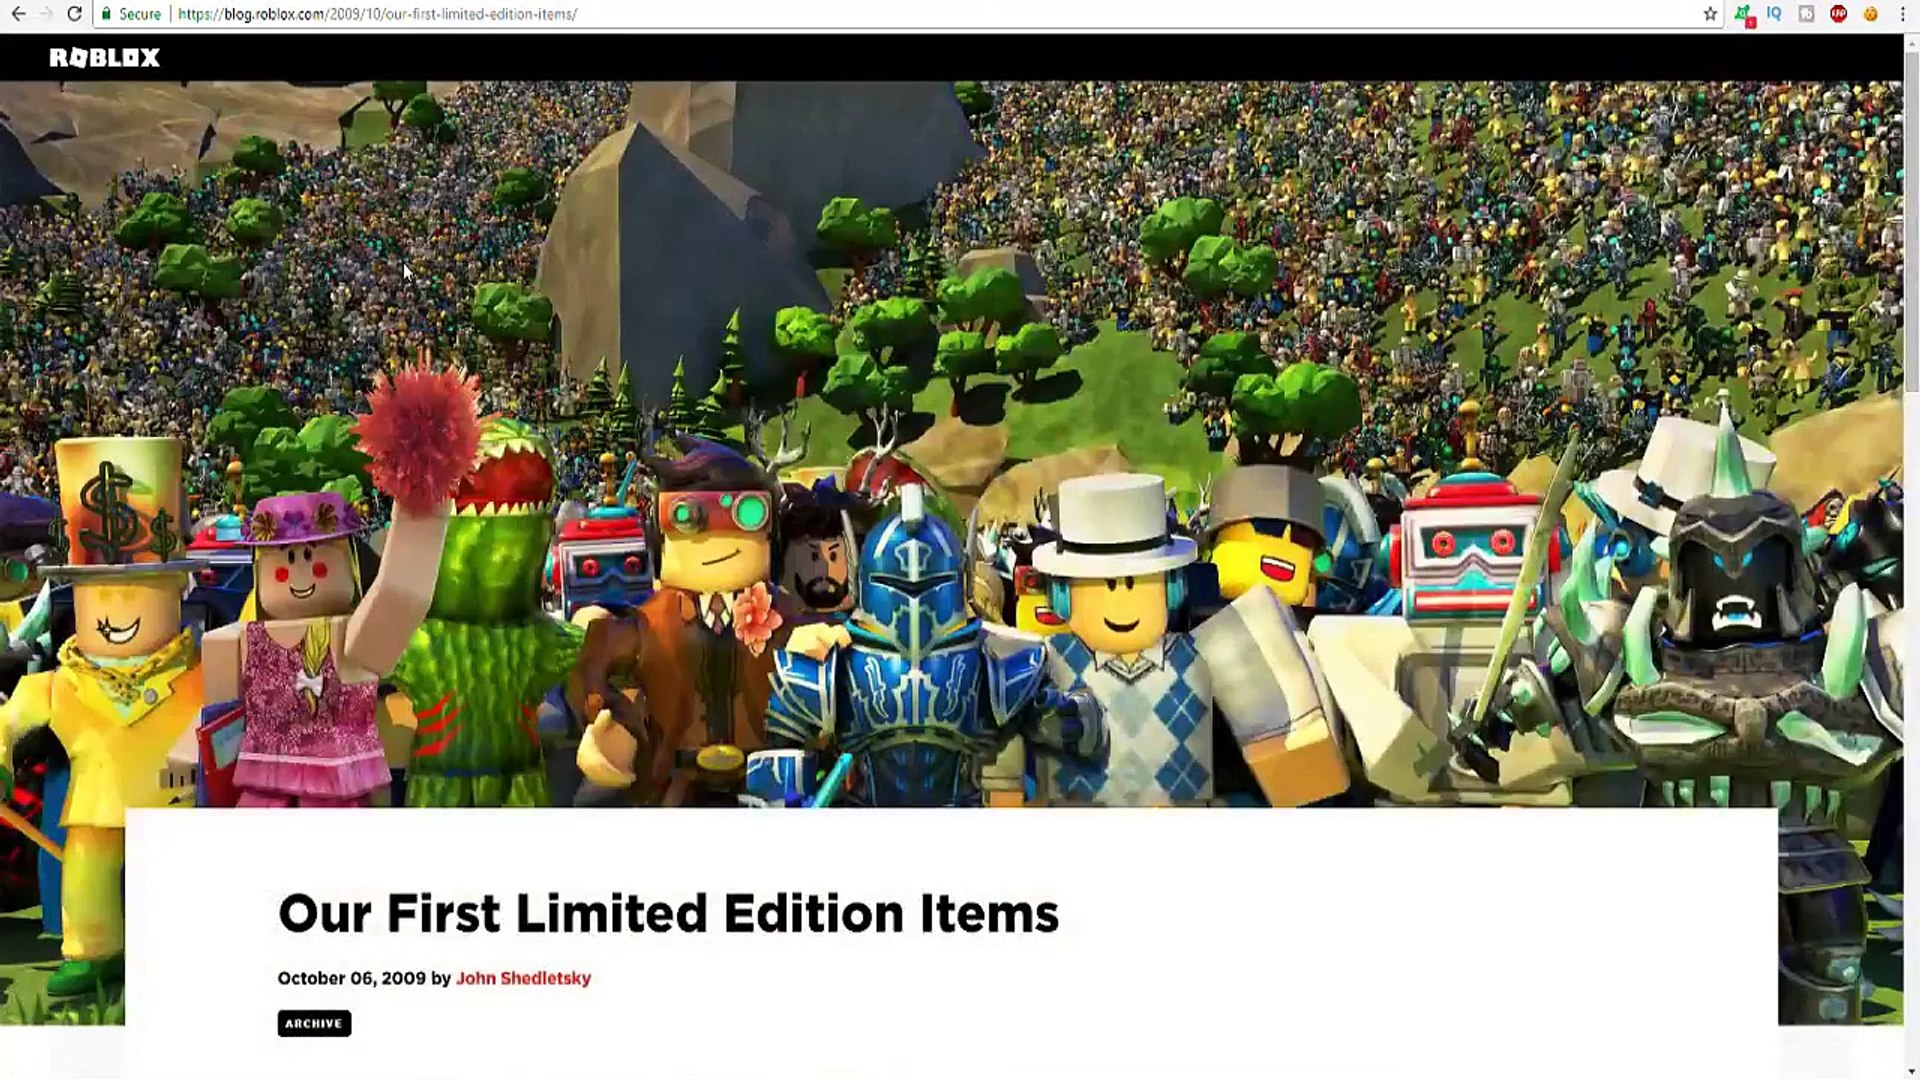 THE OLDEST ROBLOX ITEM EVER CREATED!! - Dailymotion Video